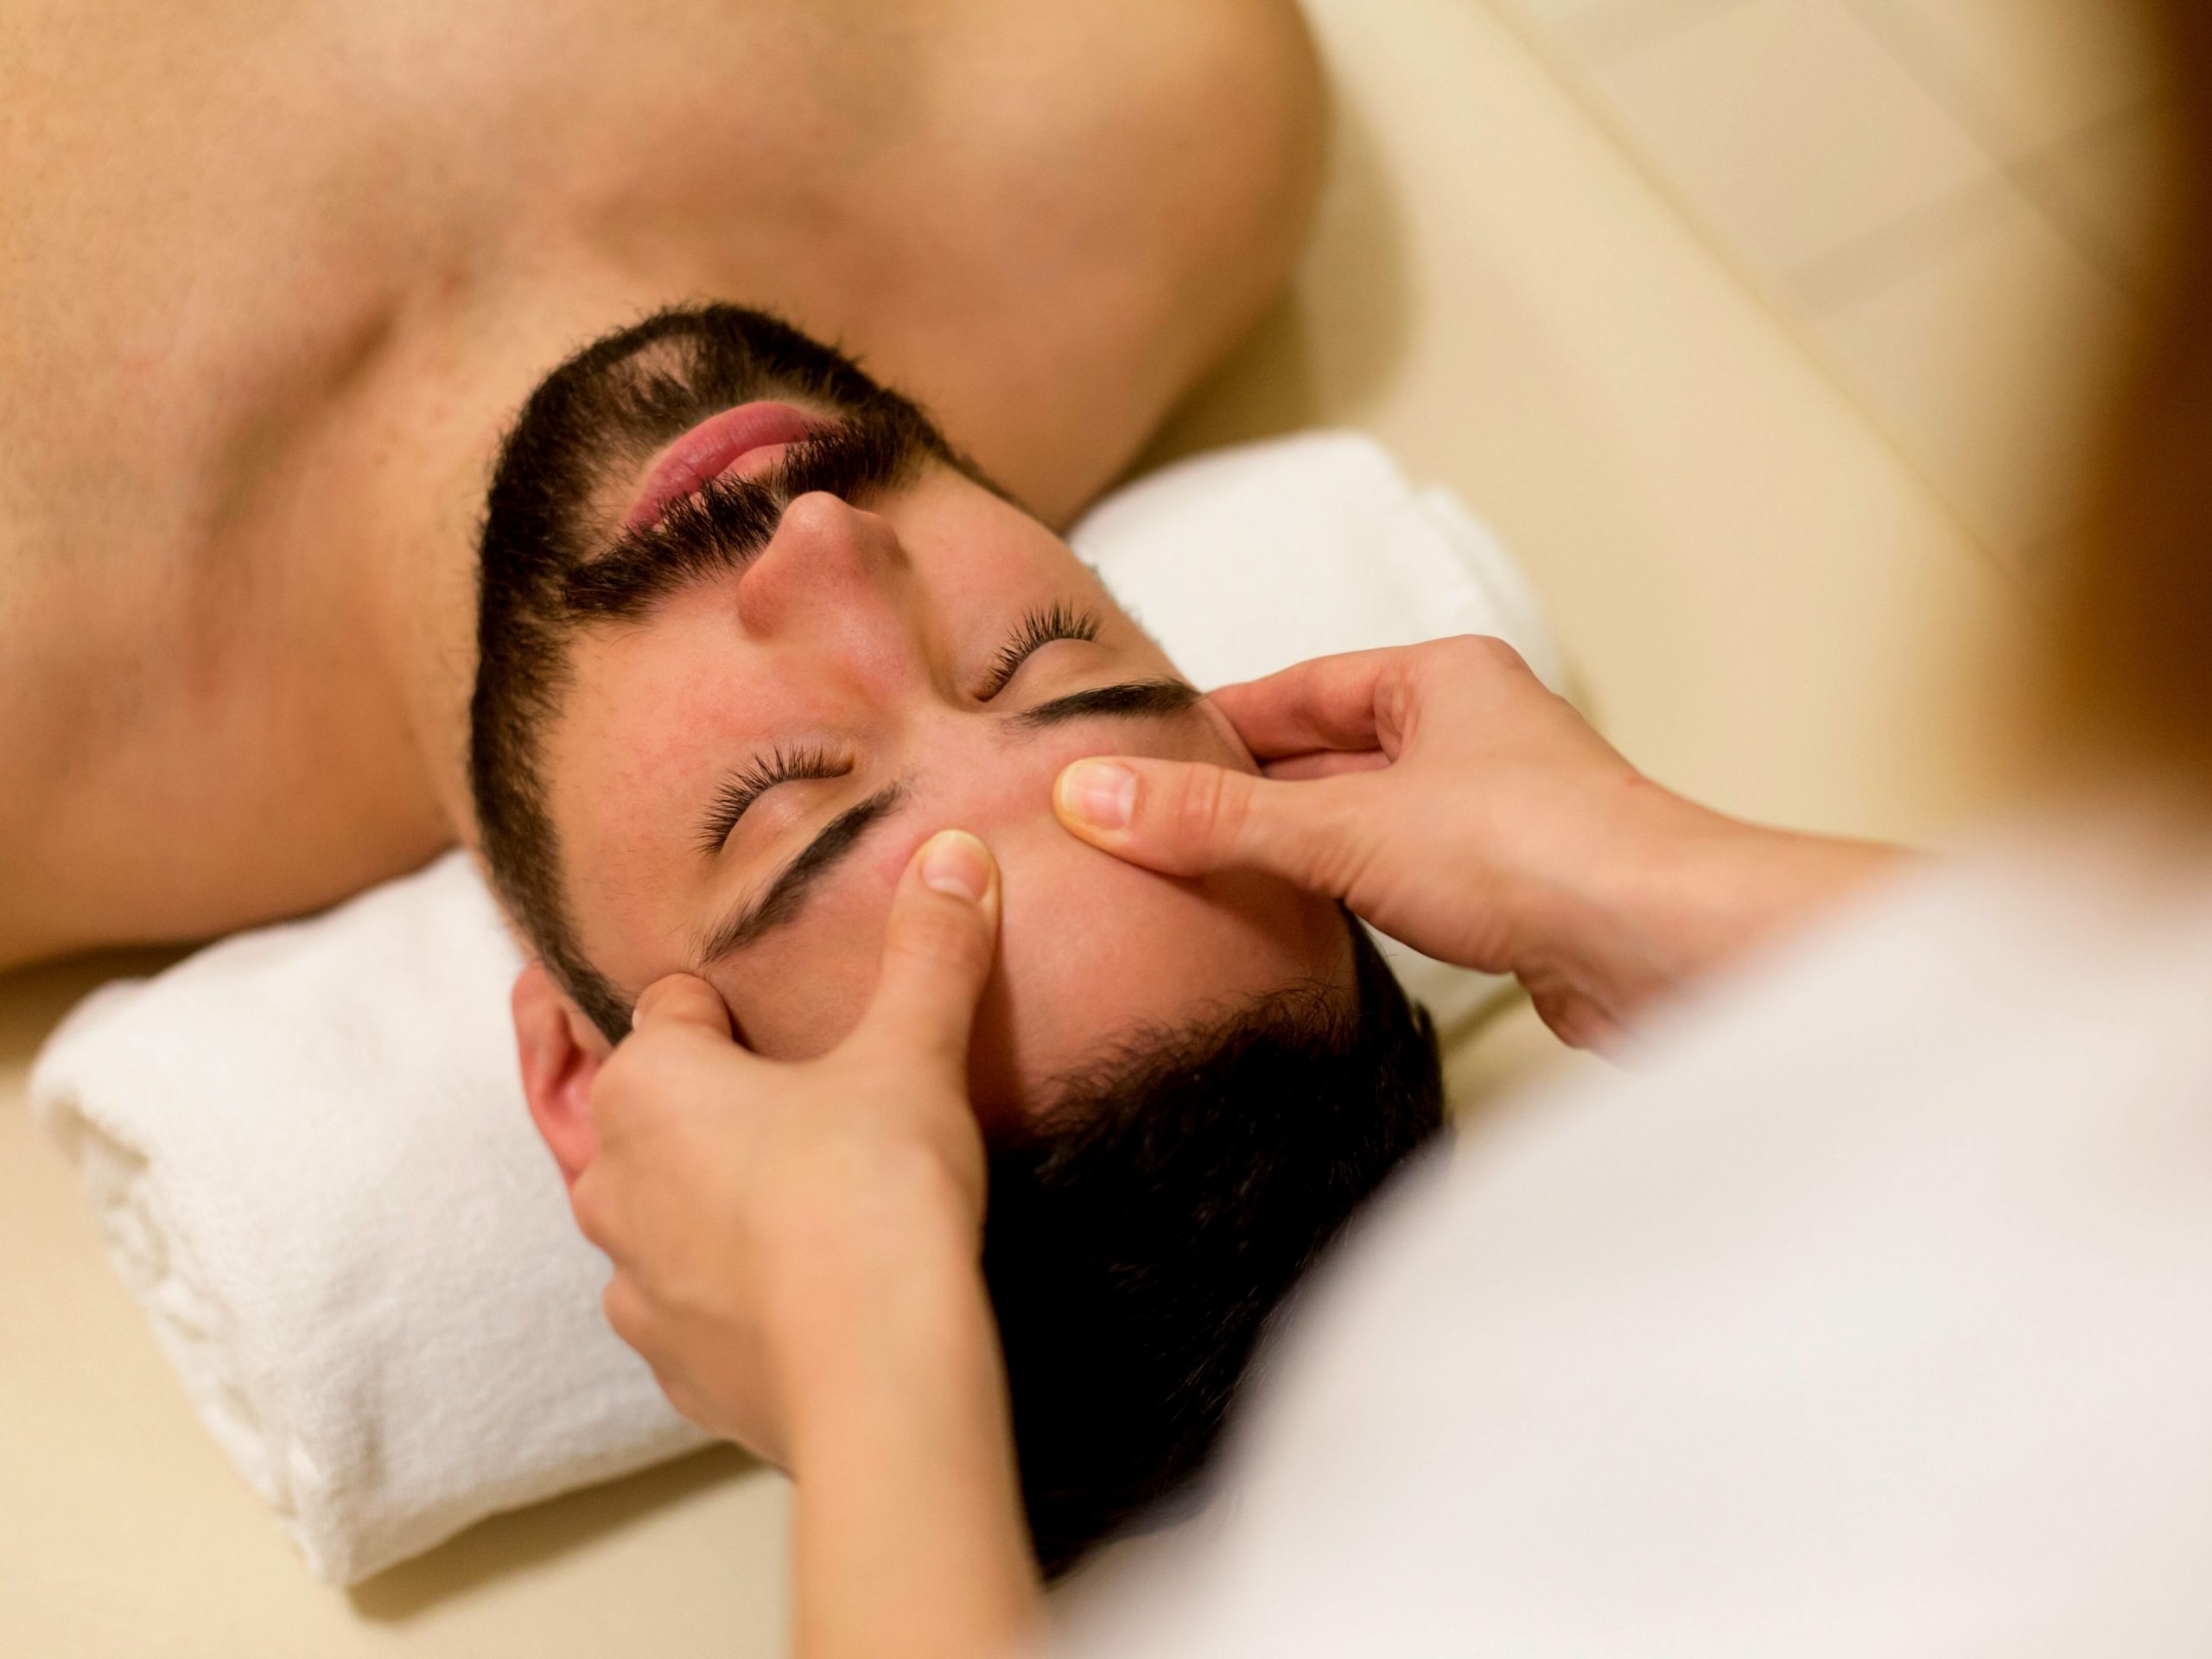 Indian head massage: how it improves your general wellbeing